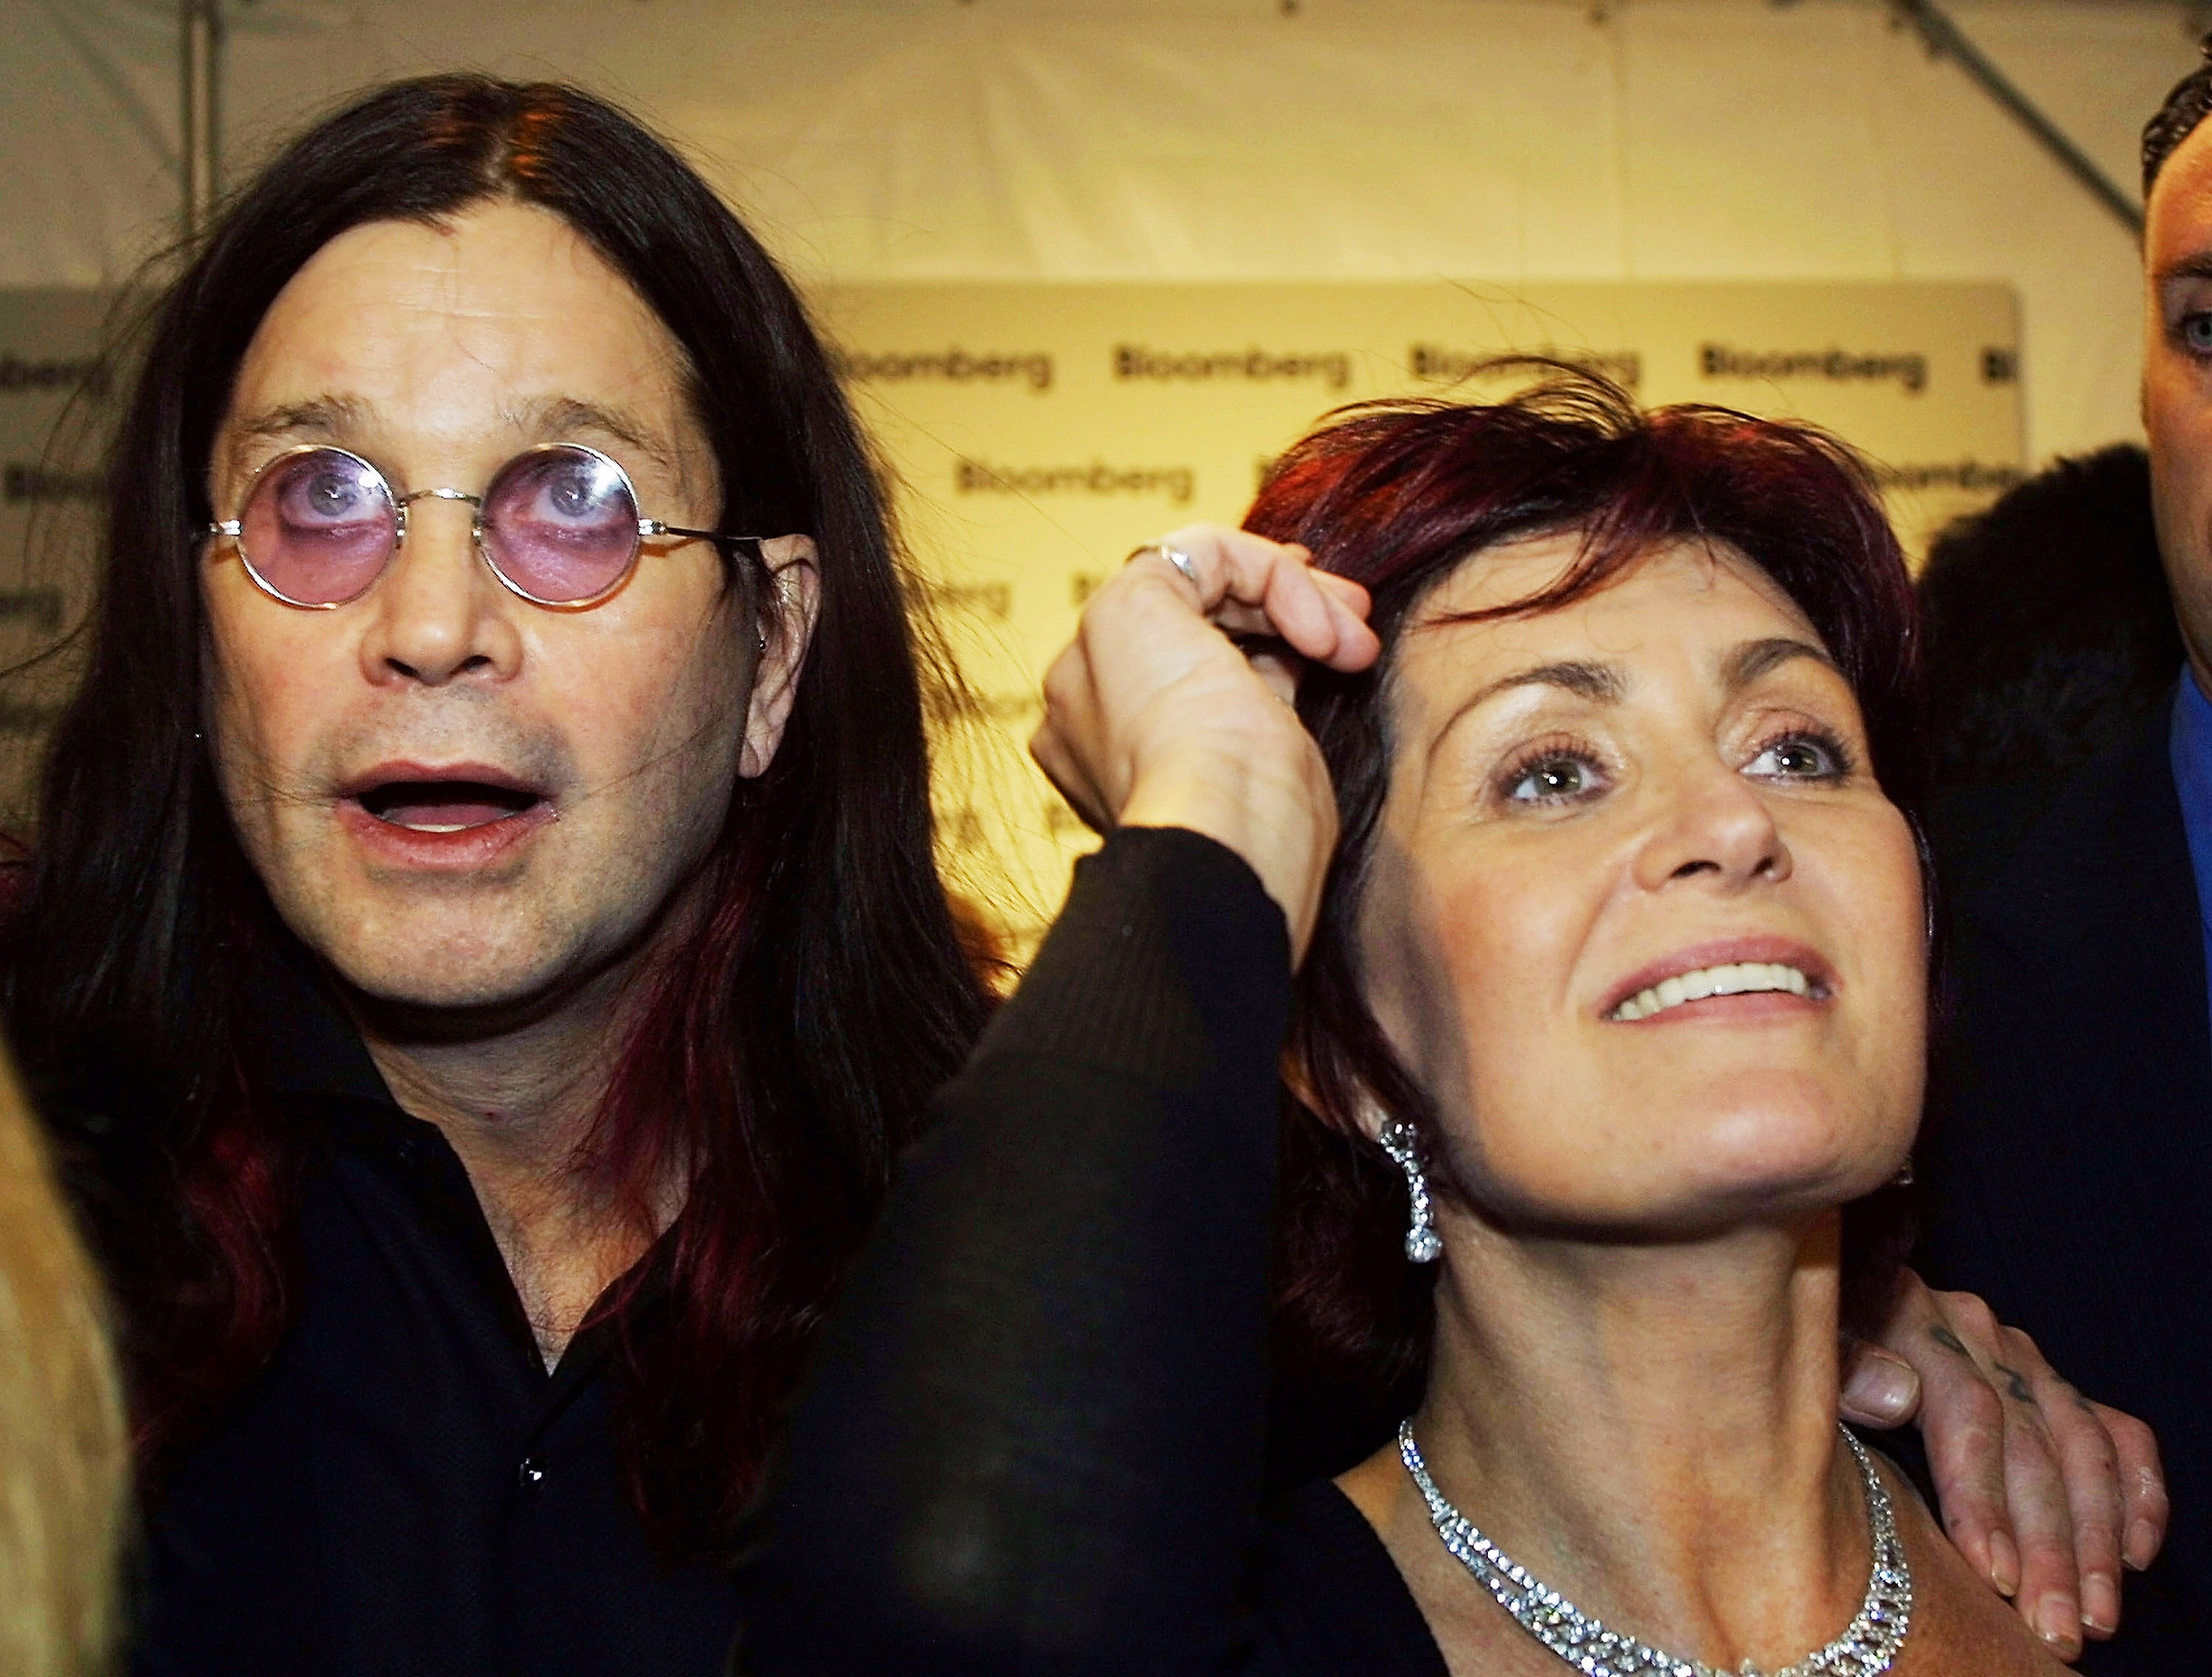 Ozzy Osbourne with his wife Sharon on May 4, 2002 in Washington, DC. | Source: Getty Images